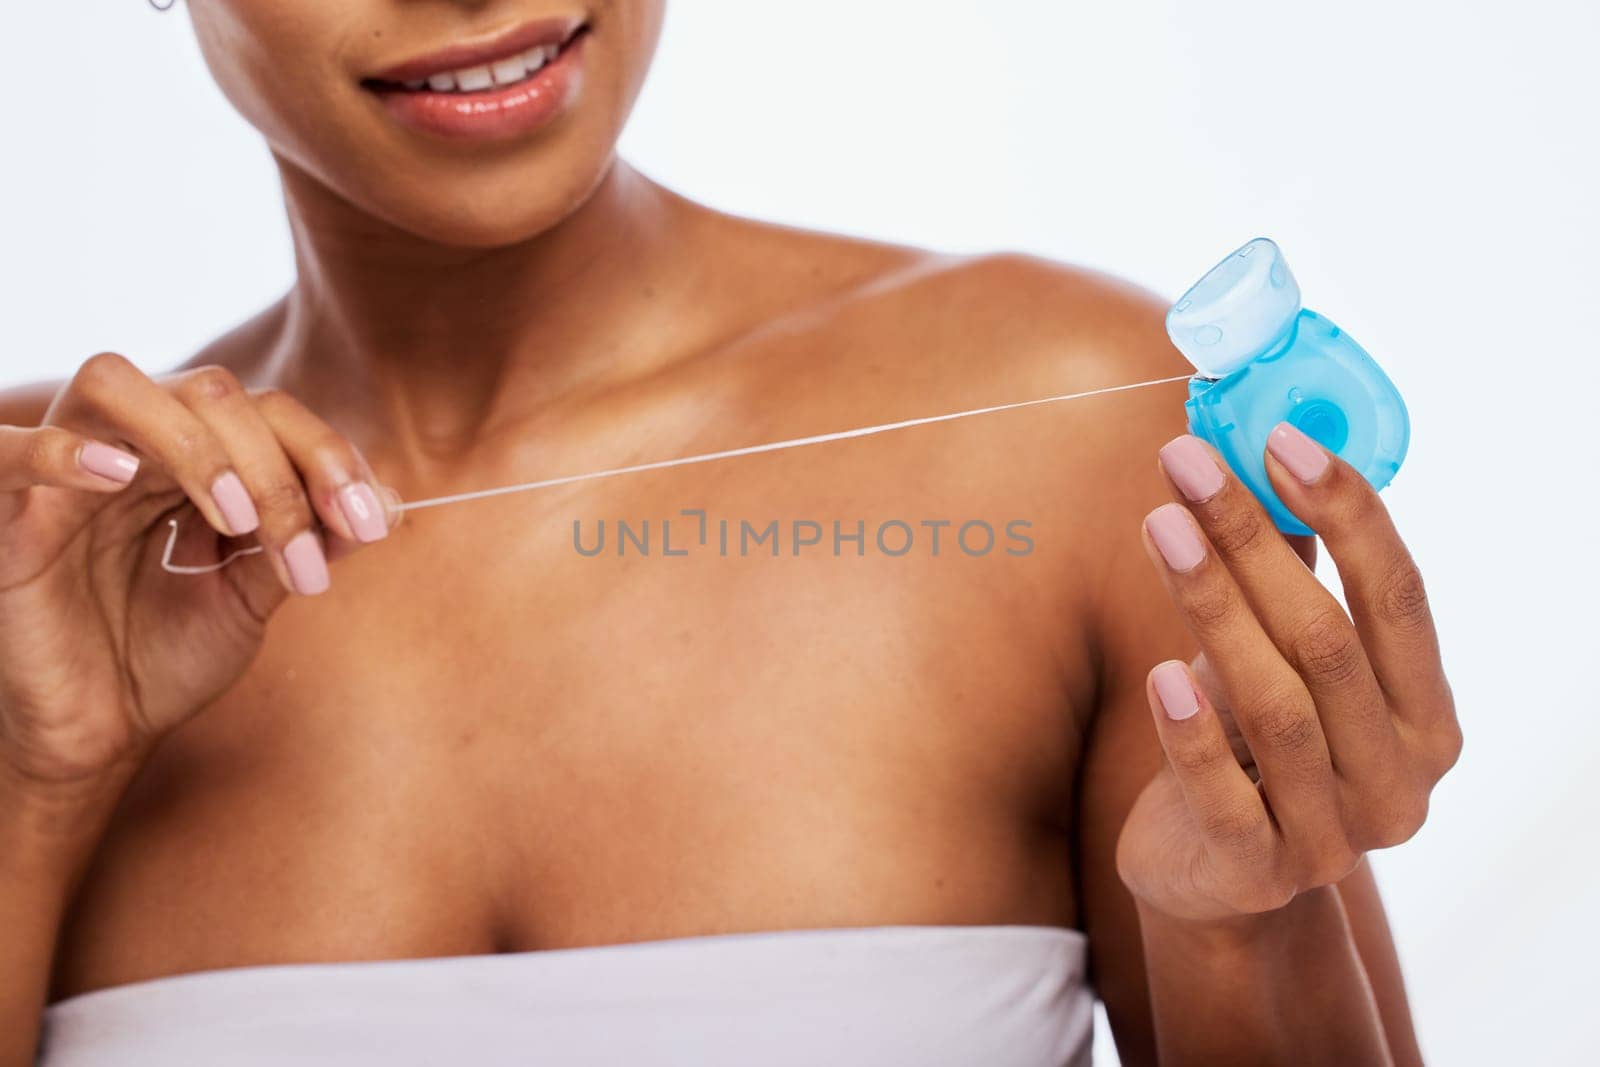 Dental, floss in hands and black woman, flossing for teeth whitening, health and hygiene isolated on white background. Oral care product, skincare and mouth cleaning for fresh breath in studio.